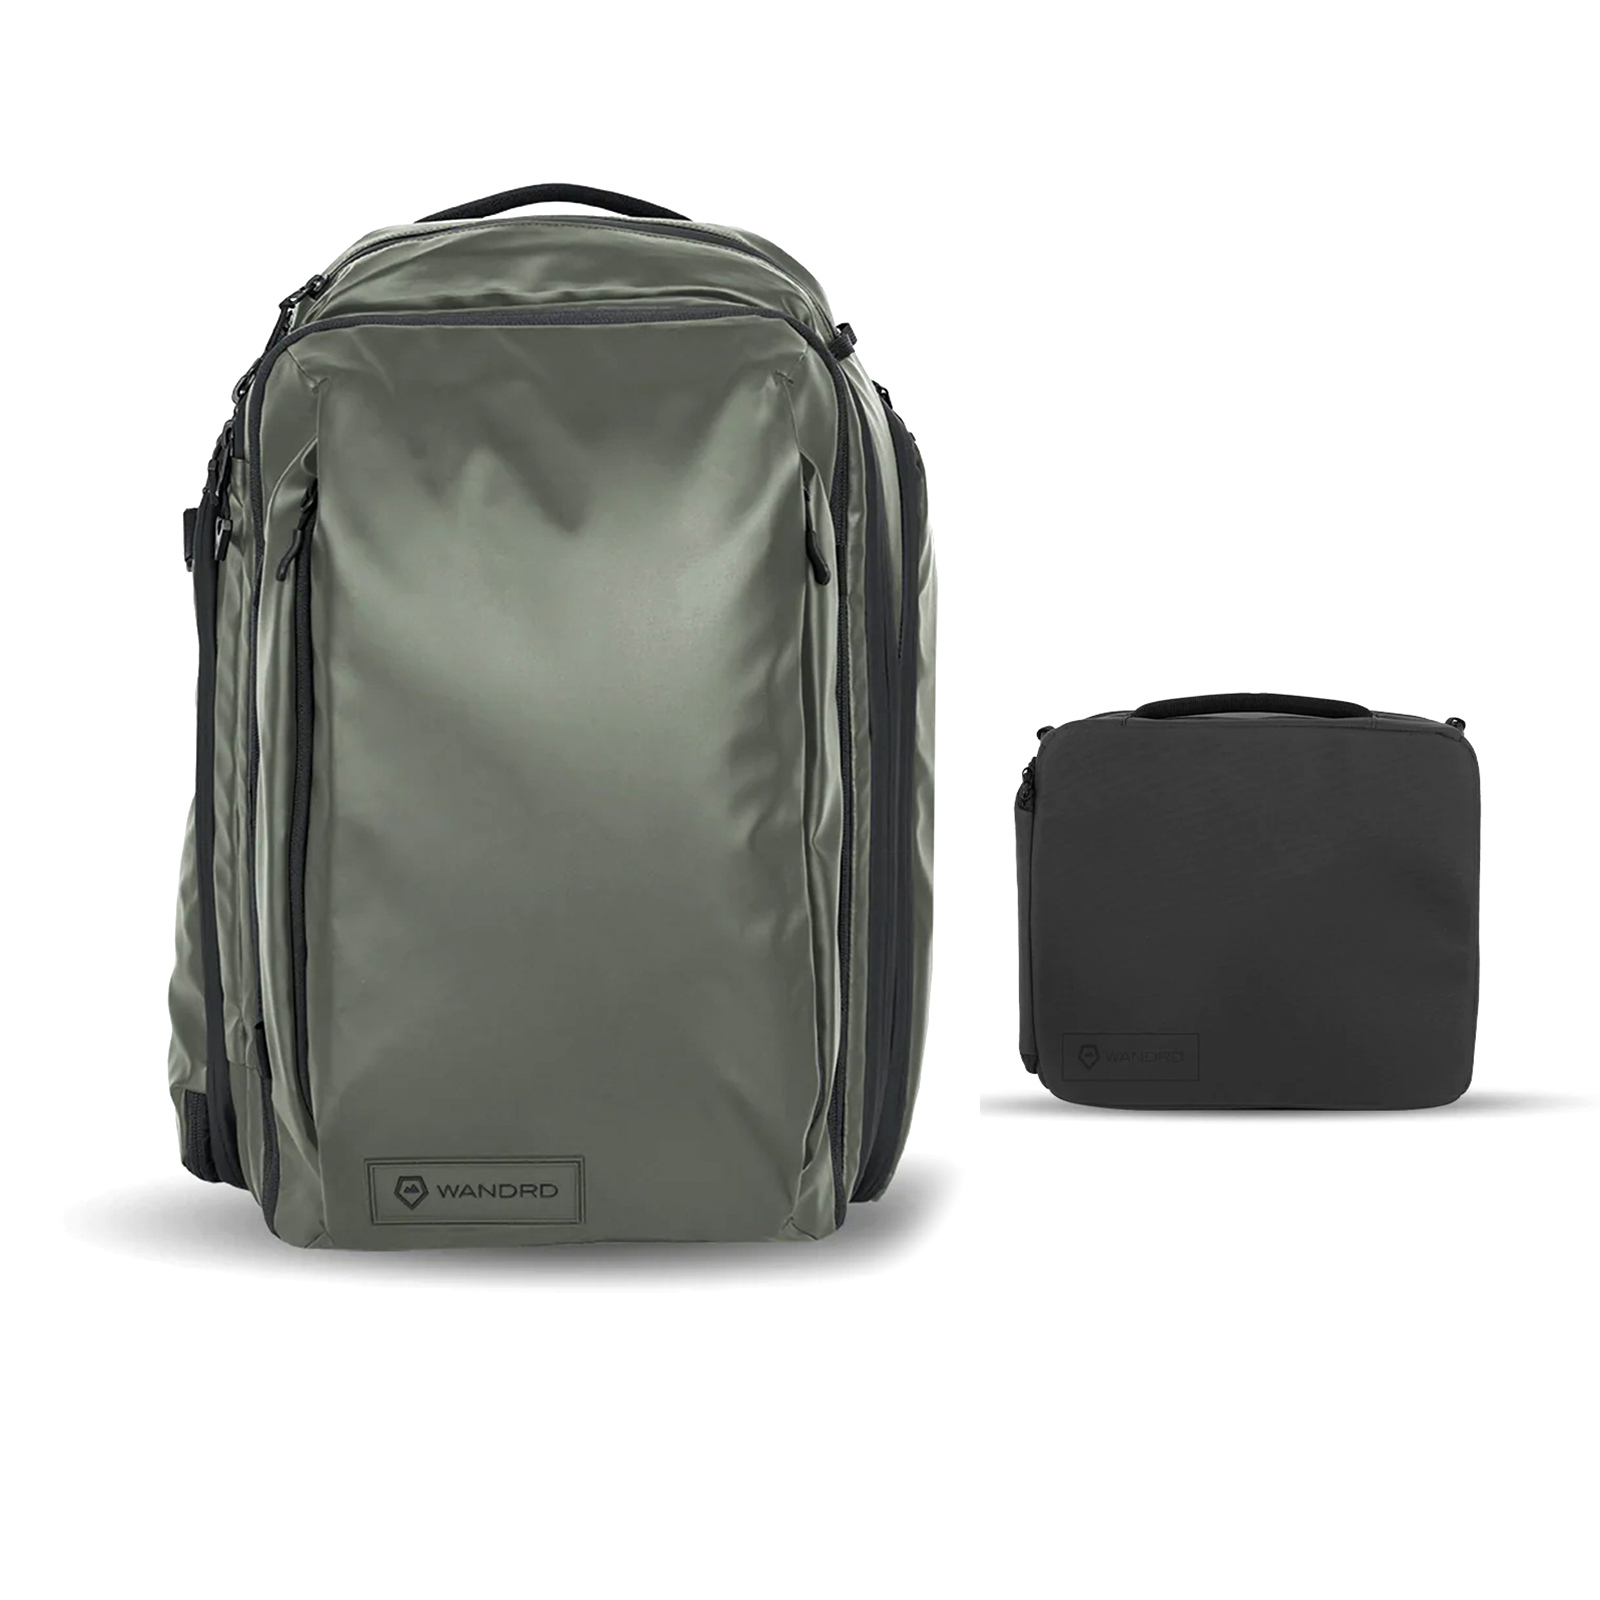 WANDRD Transit 35L Travel Backpack Essential Bundle - Wasatch Green